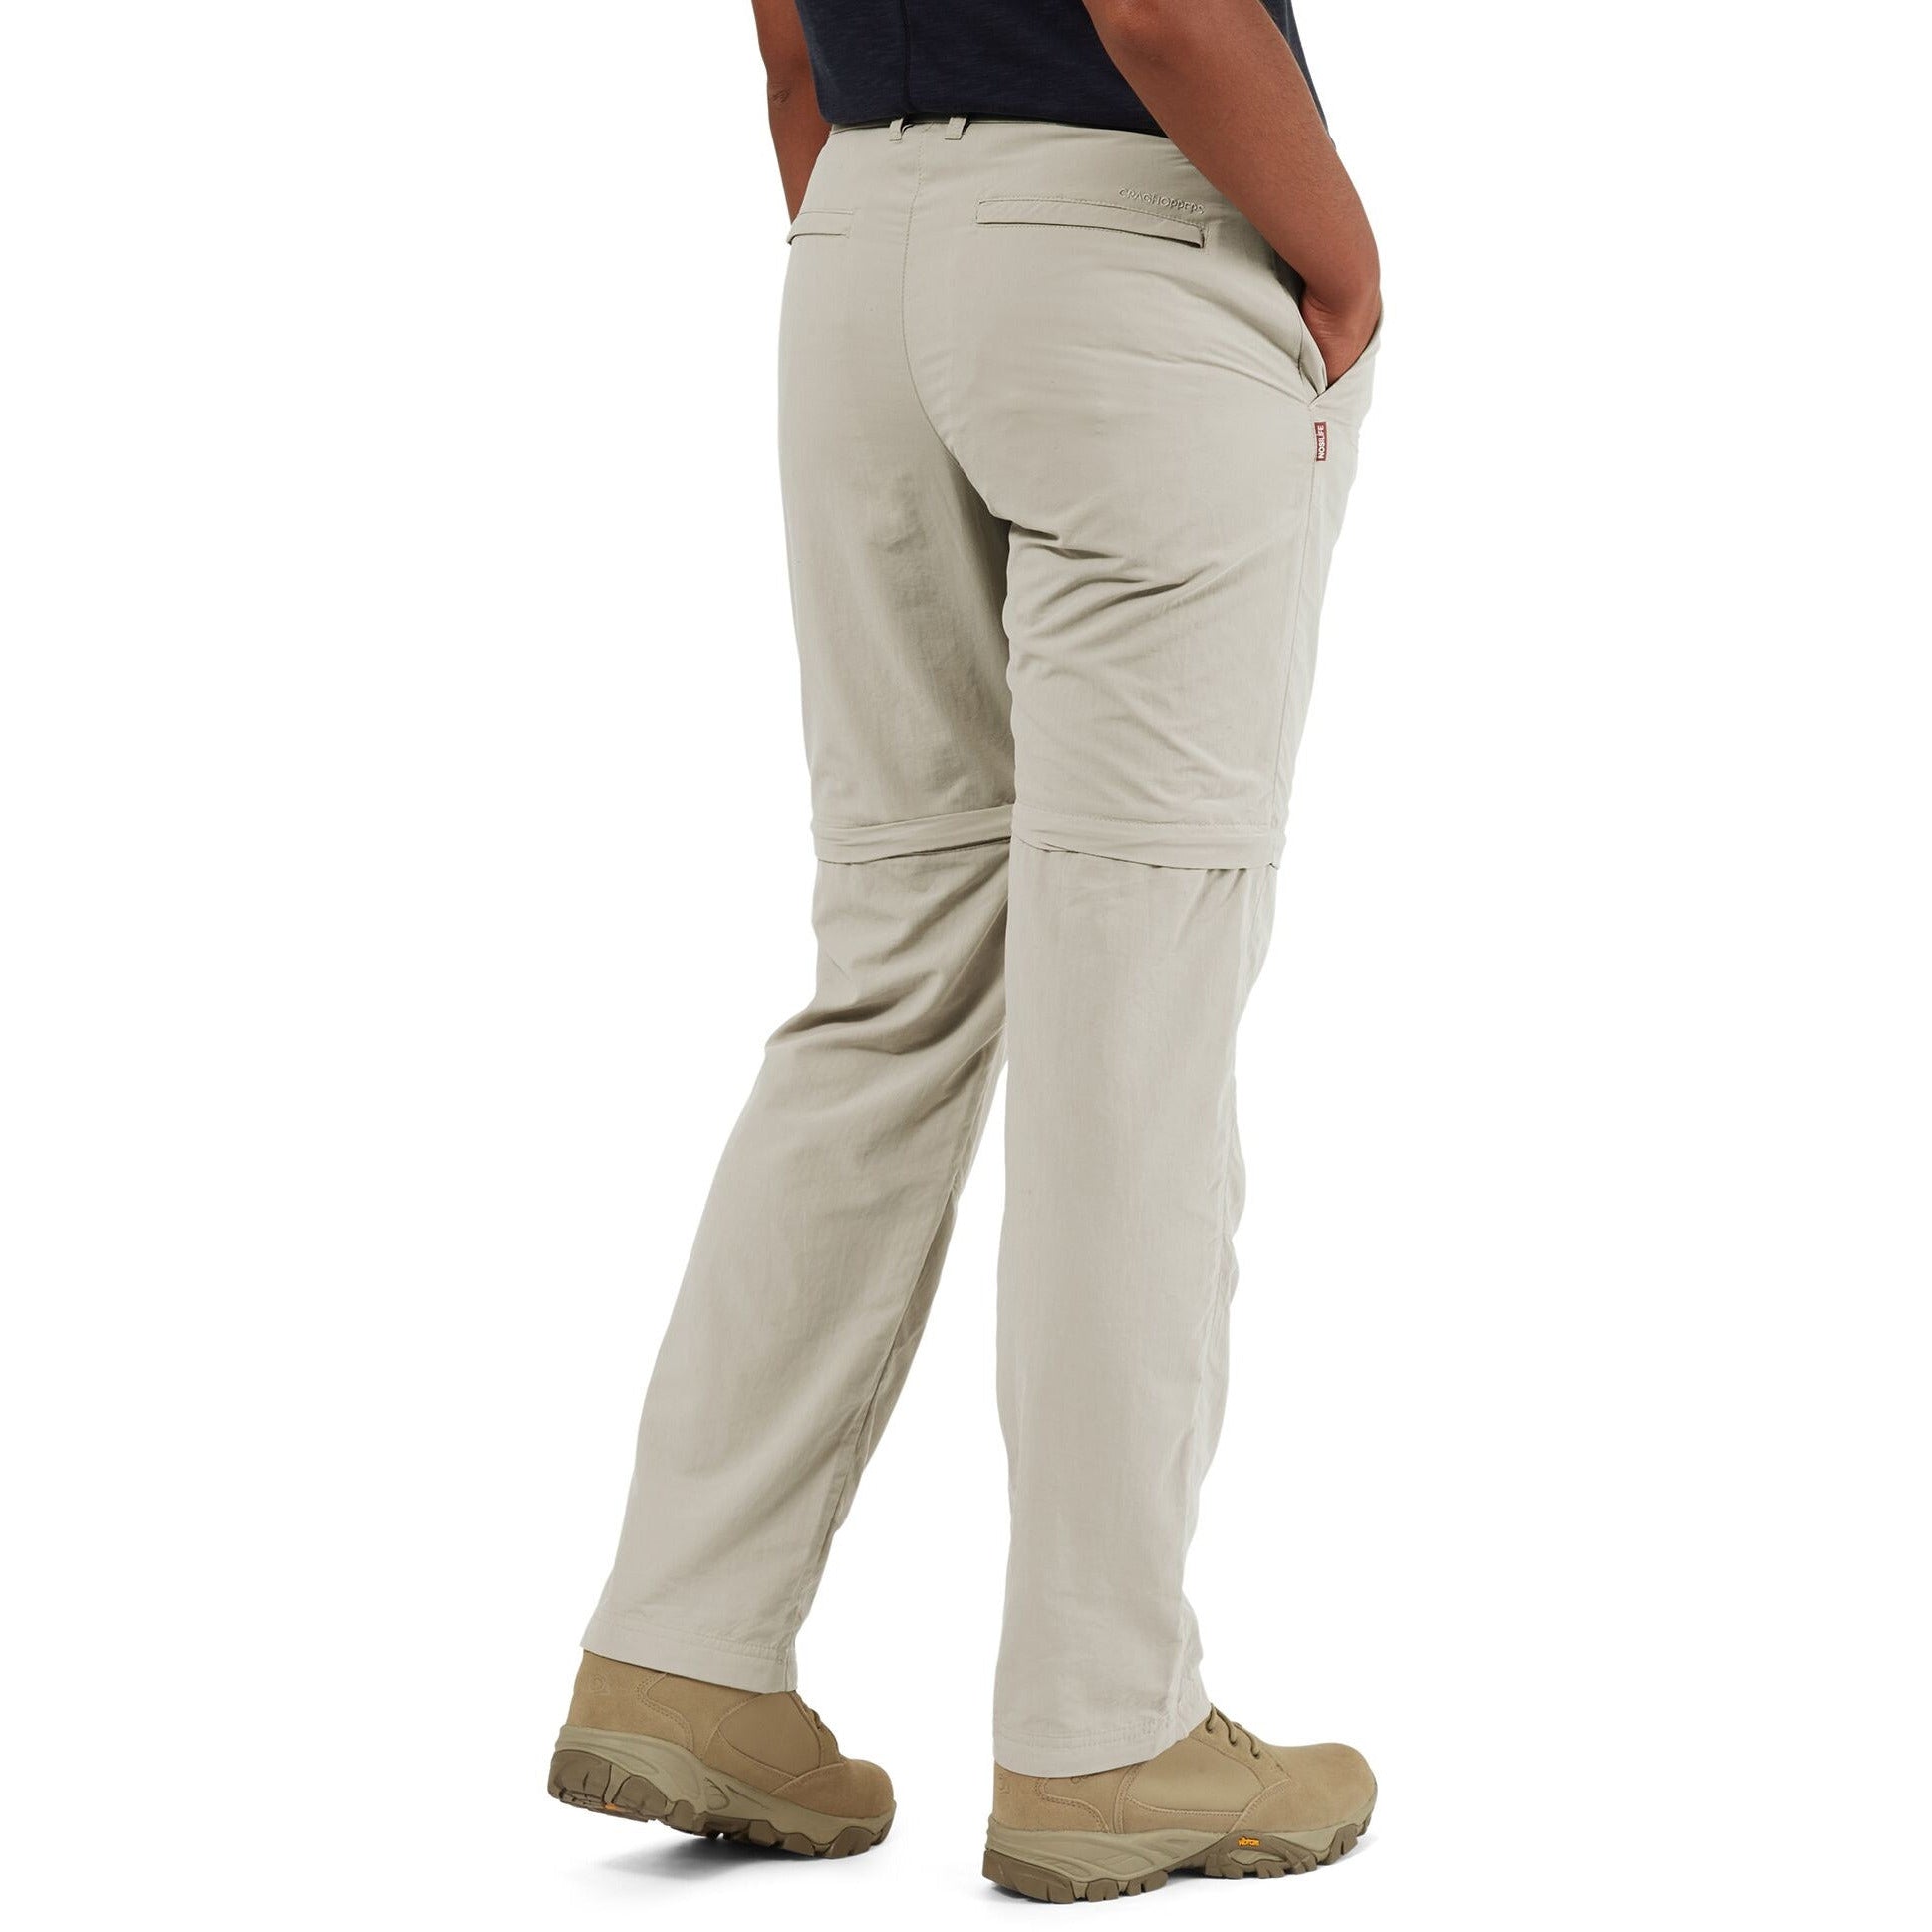 Craghoppers Nosilife Convertible Iii Trousers Cwj1214 Back View